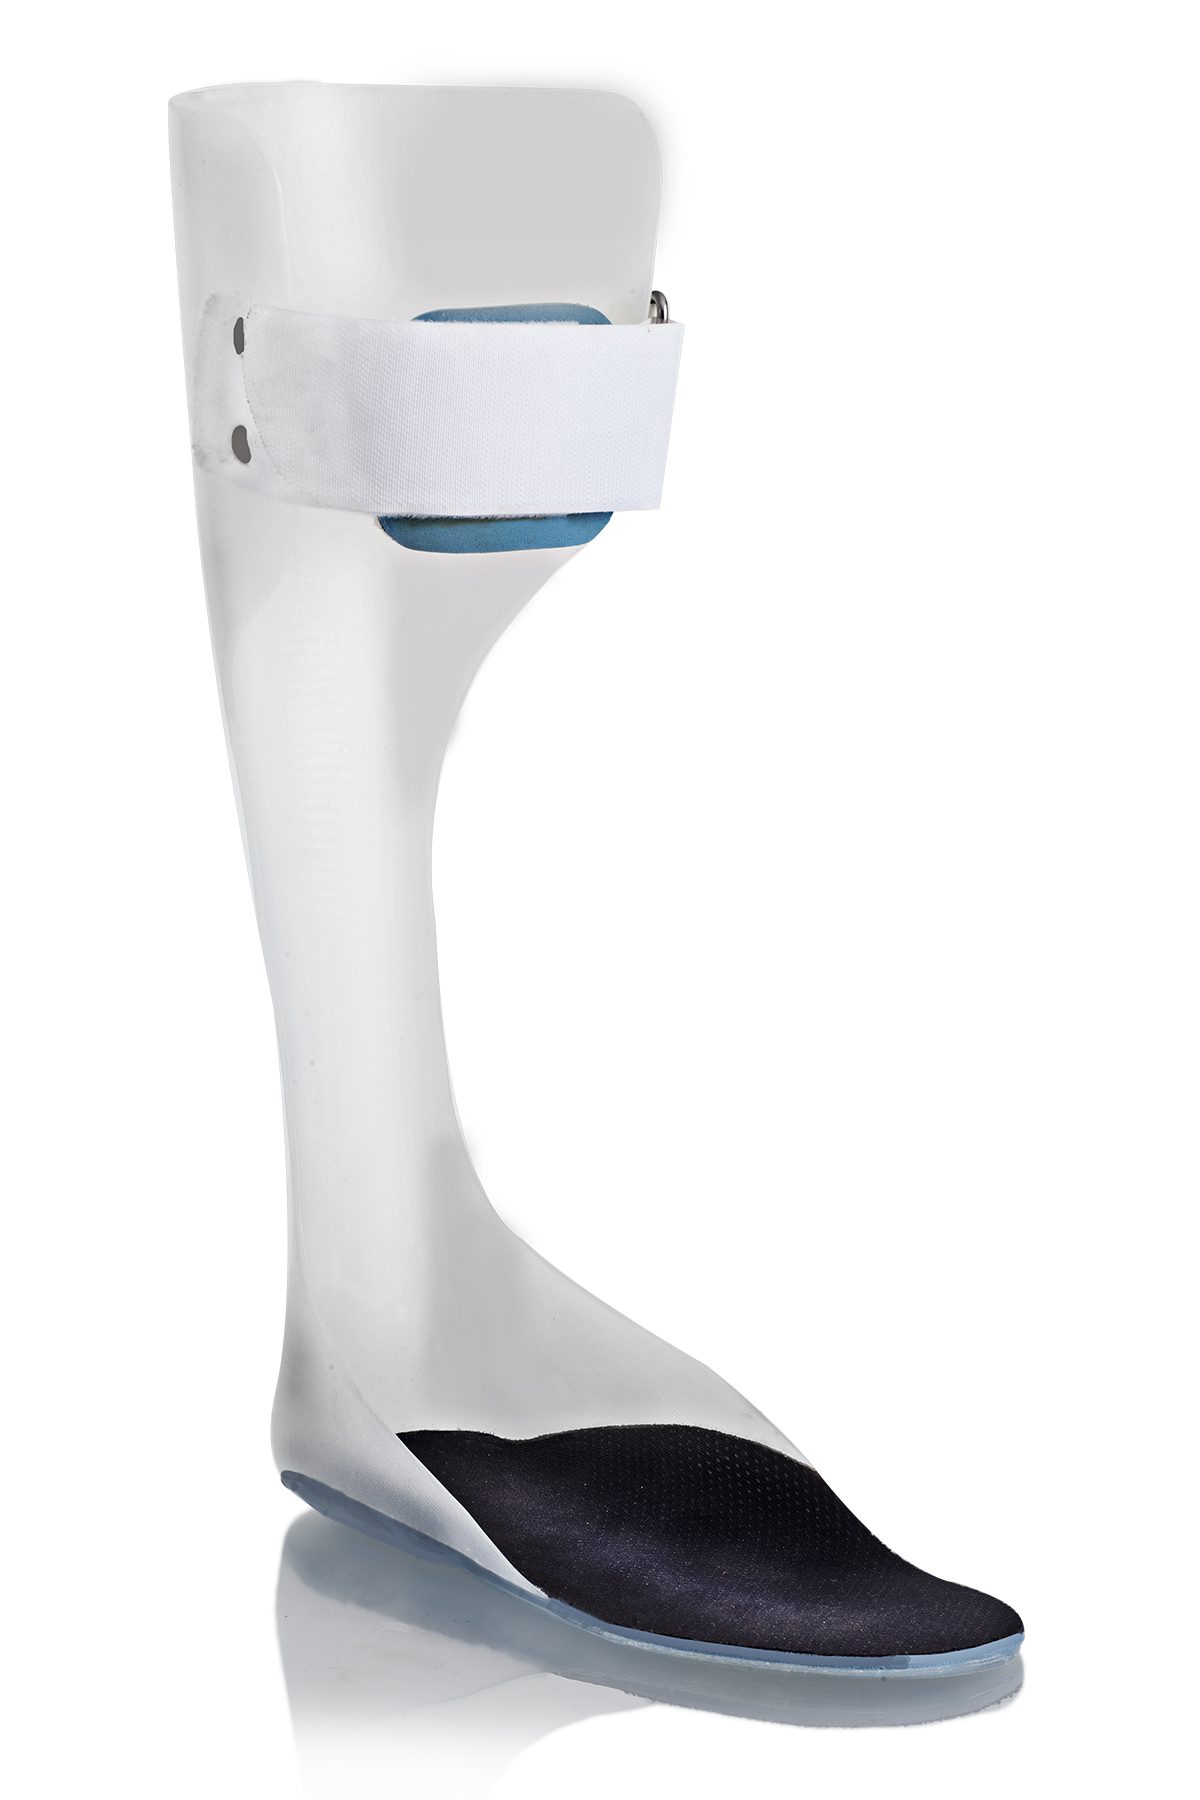 High Quality Foot-Drop Ankle/Foot Orthosis Supports (AFO